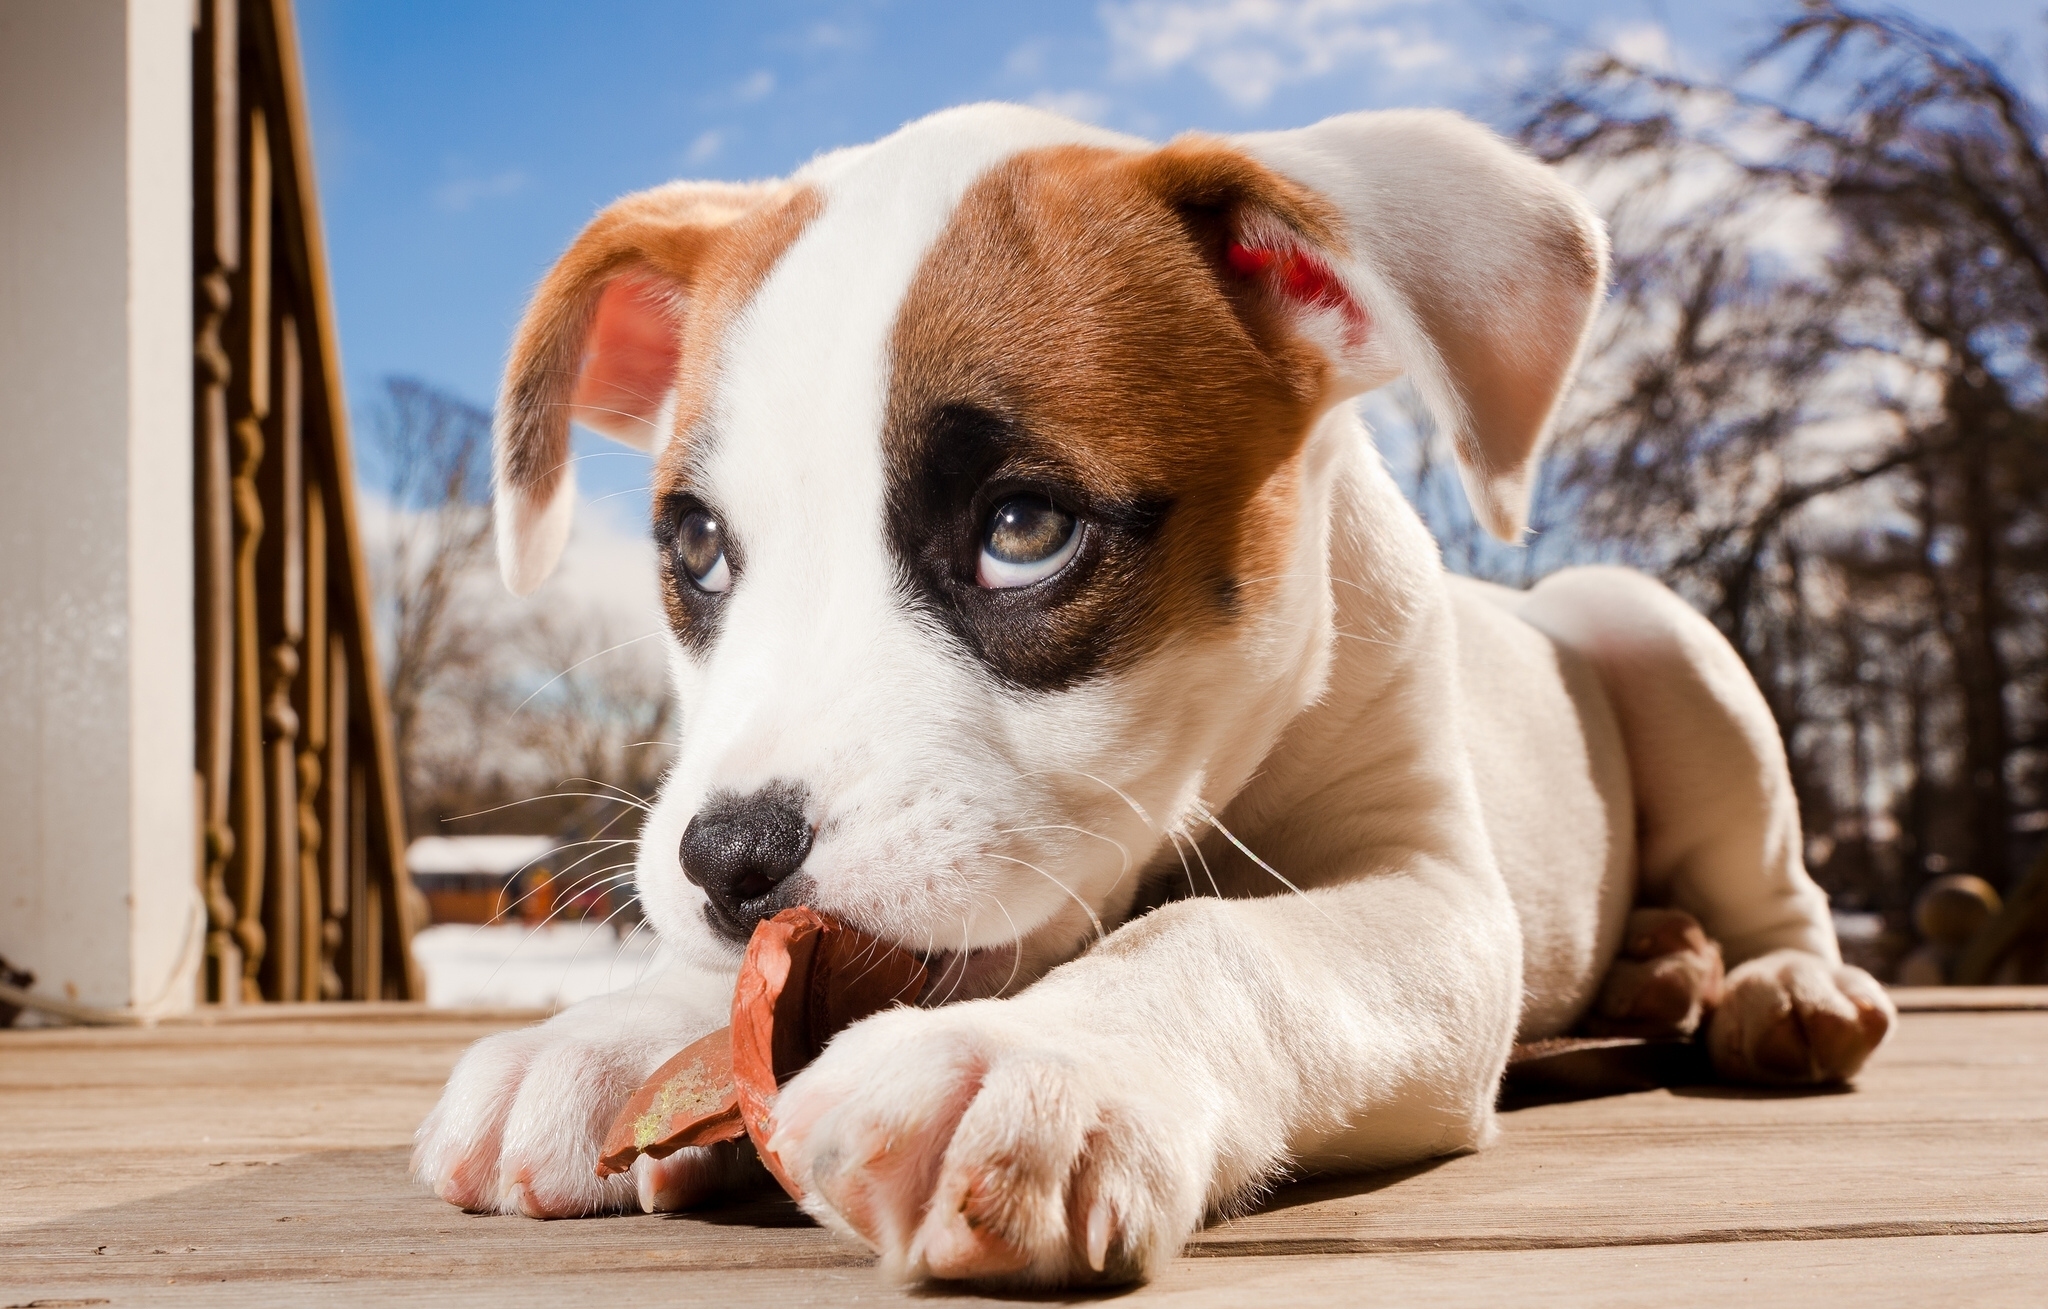 Dogs Puppy Glance Snout Animals baby dog eyes wallpaper